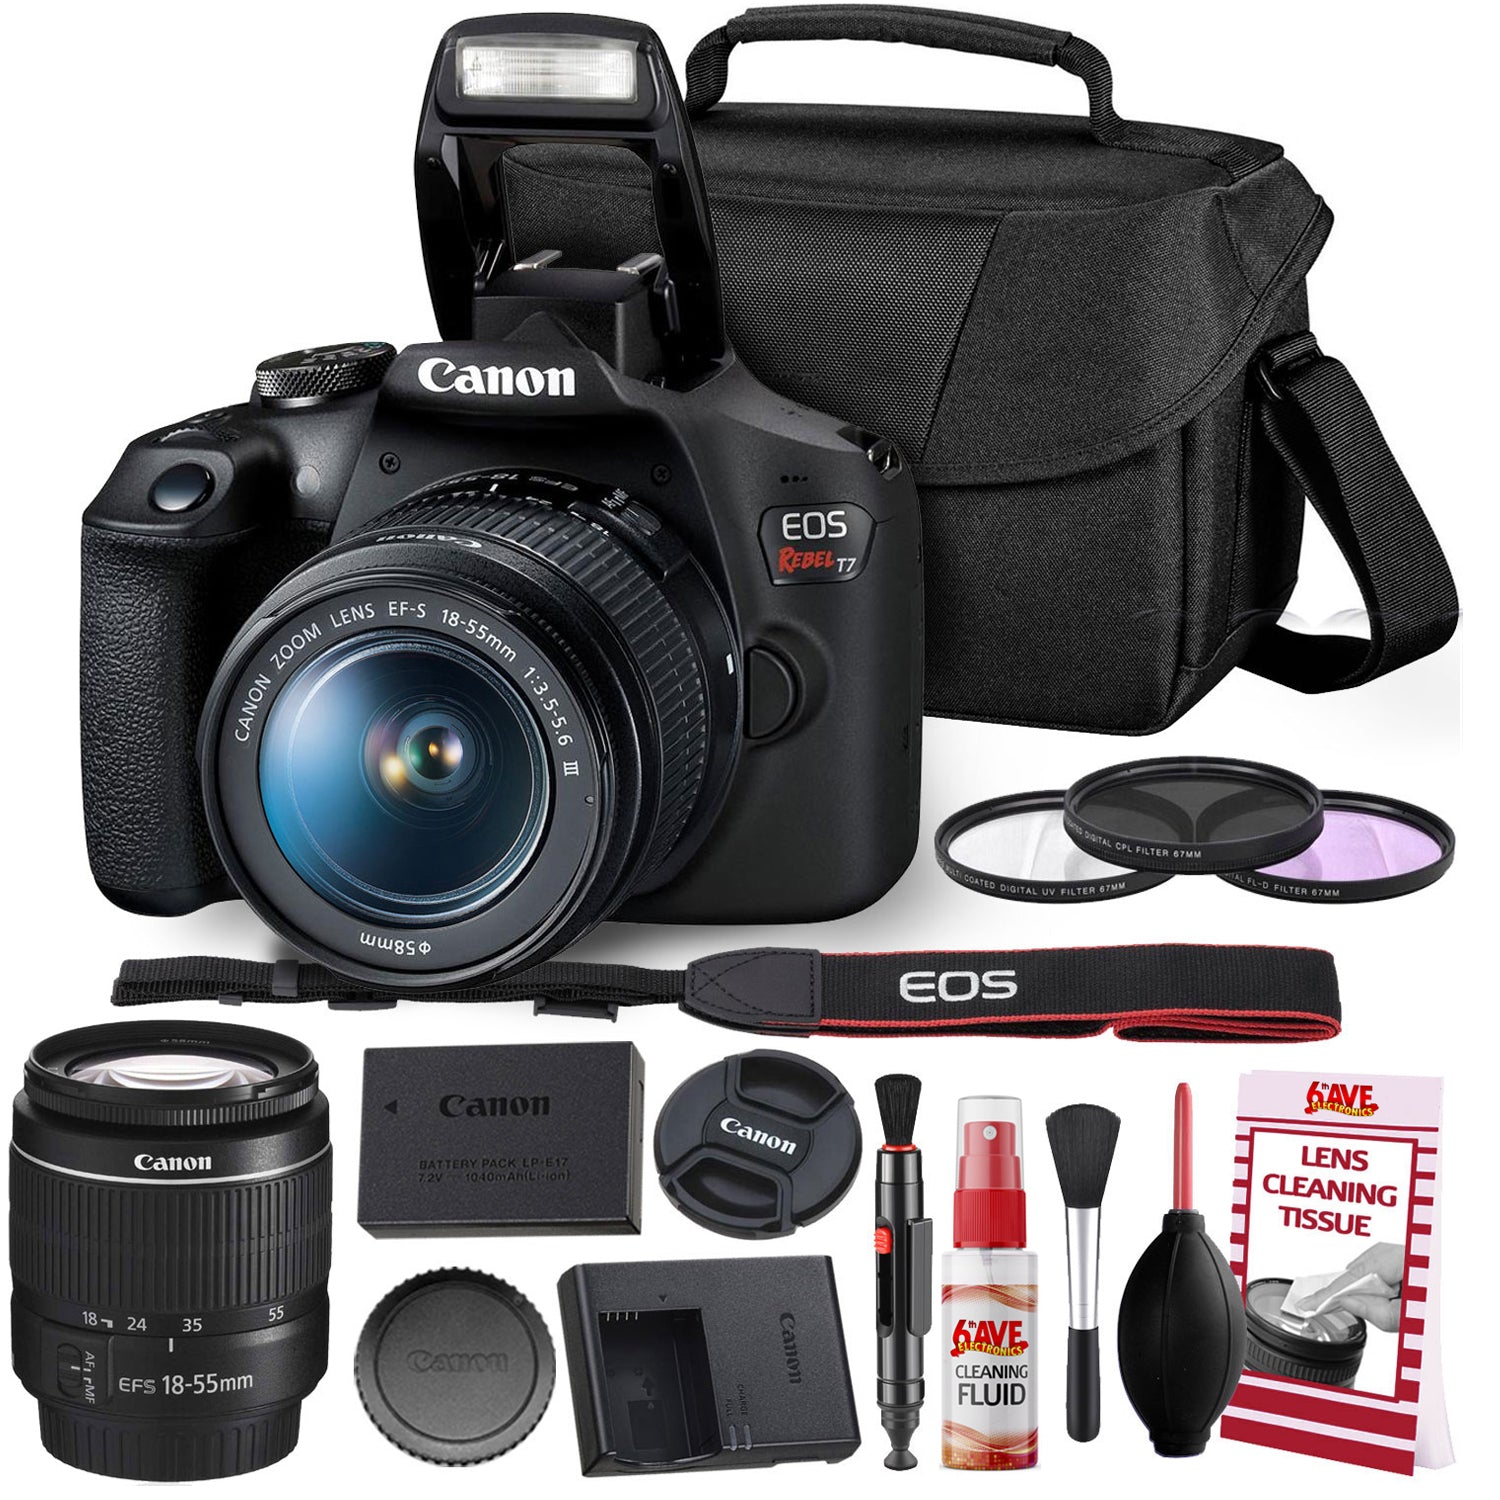 Canon Rebel T7 DSLR Camera with 18-55mm DC III Lens Kit and Carrying Case, Creative Filters, Cleaning Kit, and More